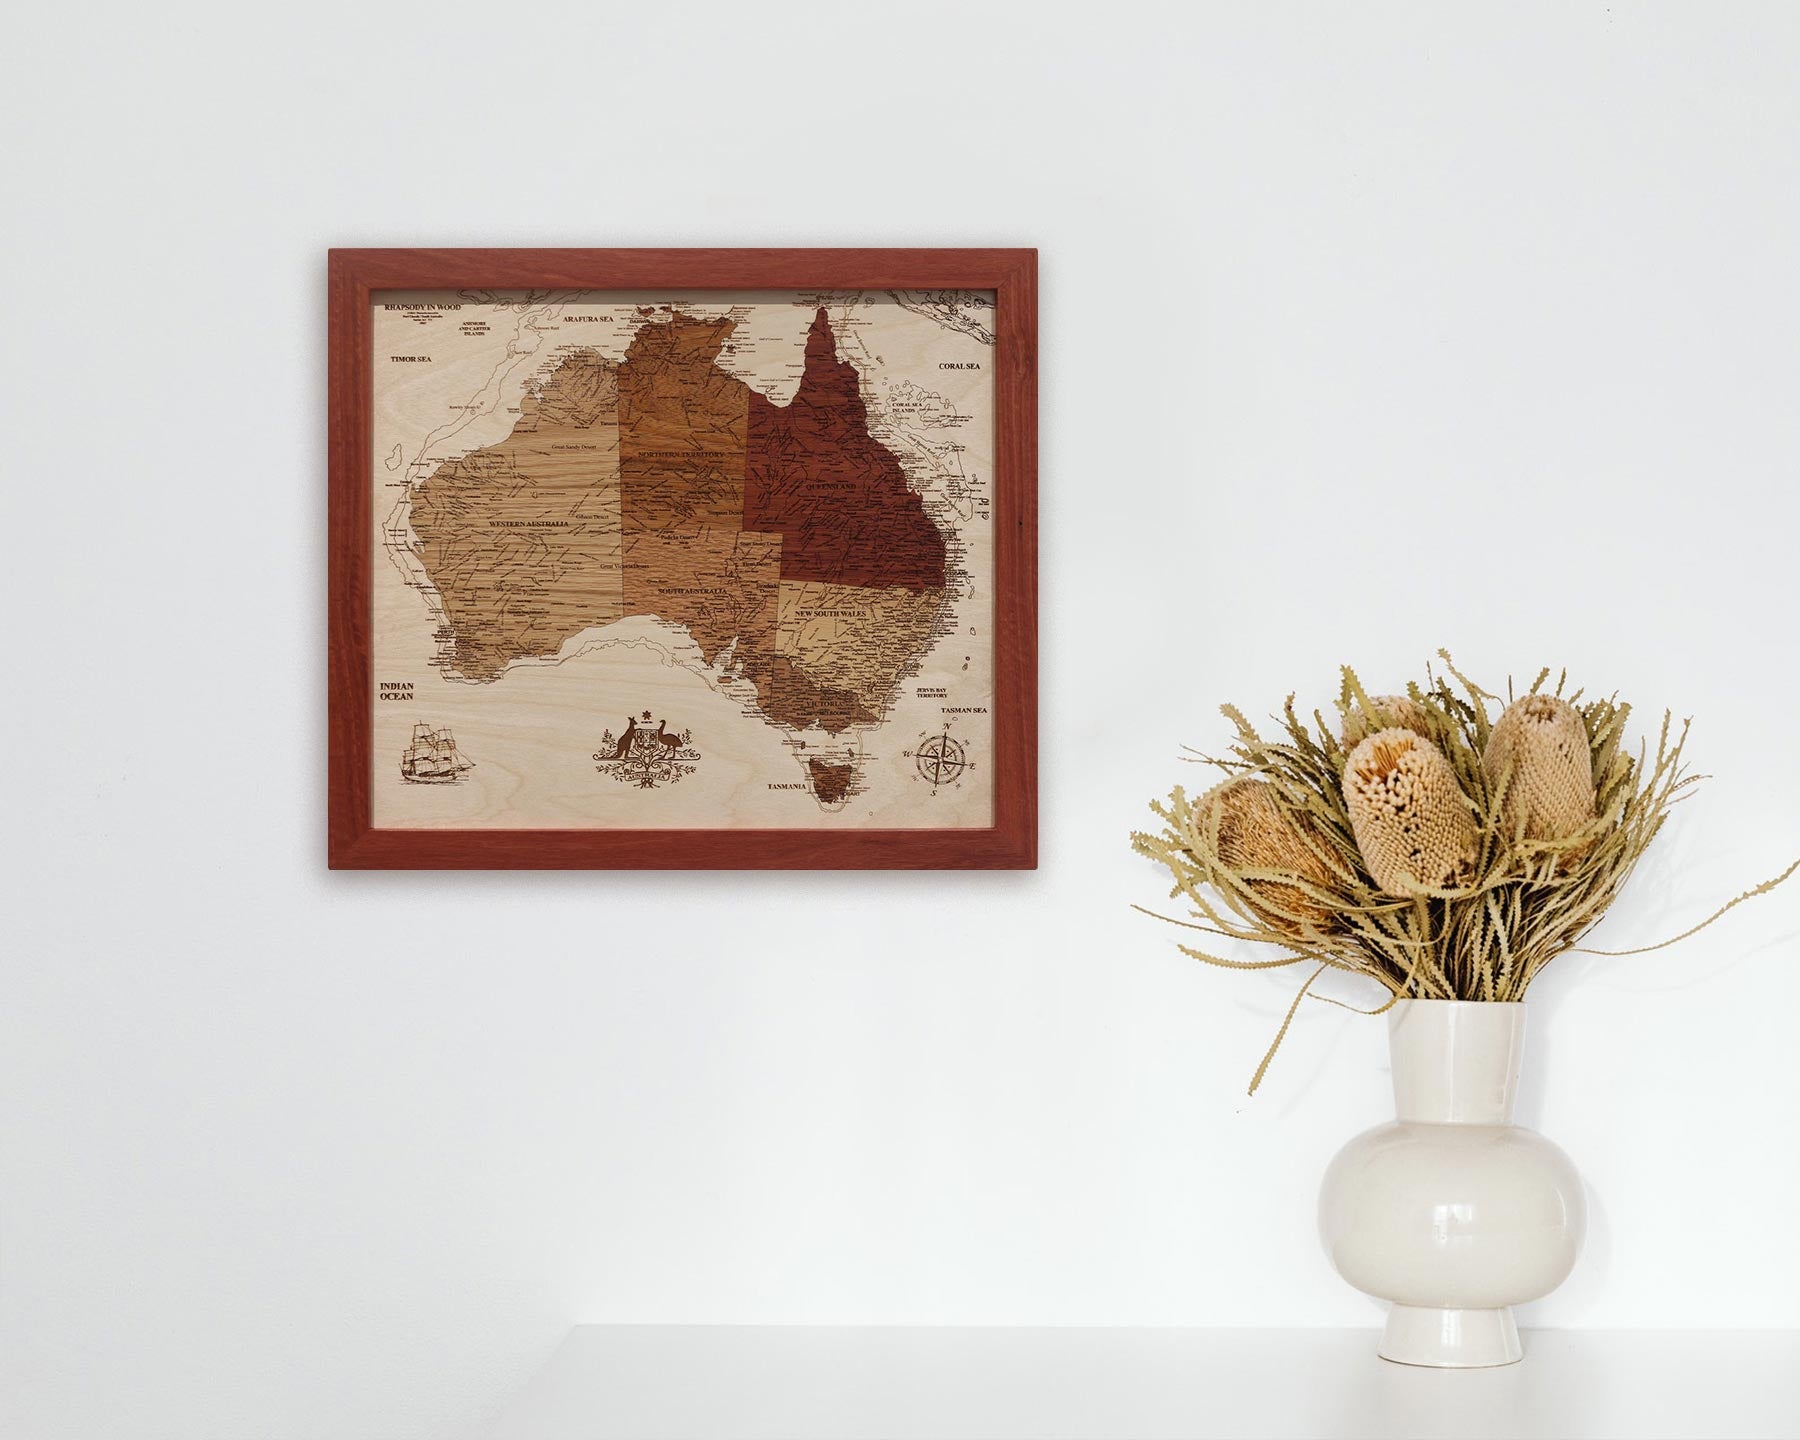 Great Little Oz Map - 485mm x 425mm